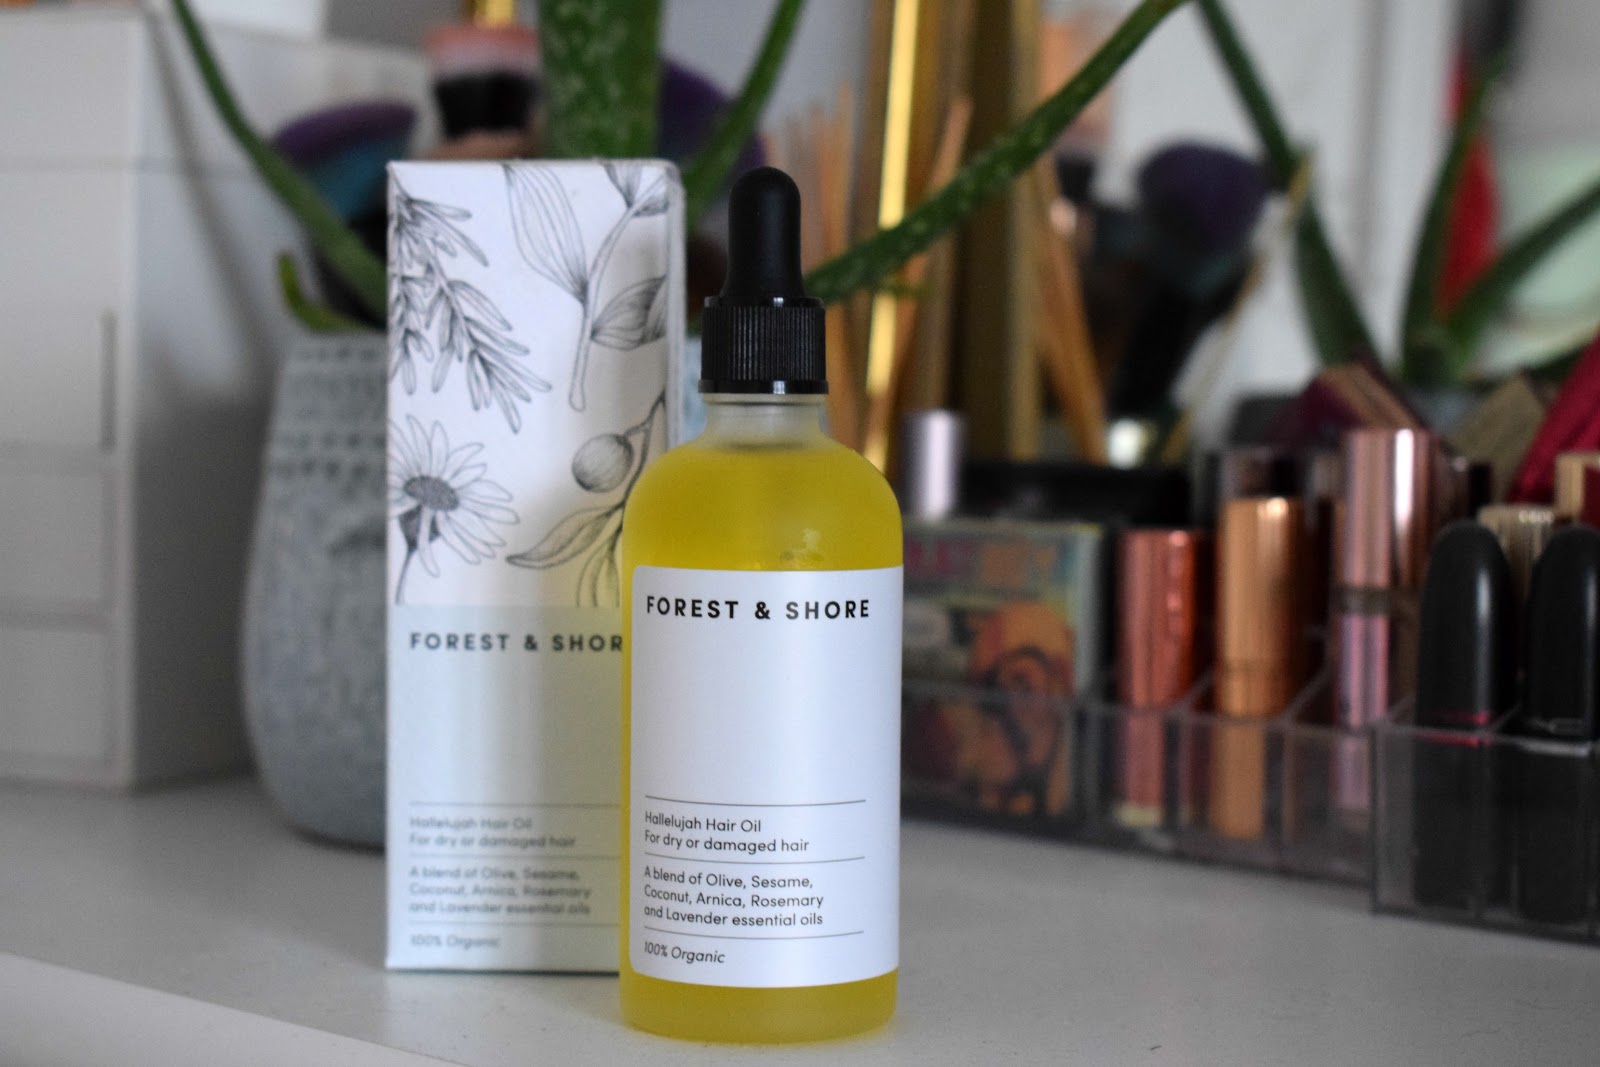 Forest & Shore Hallelujah hair oil review